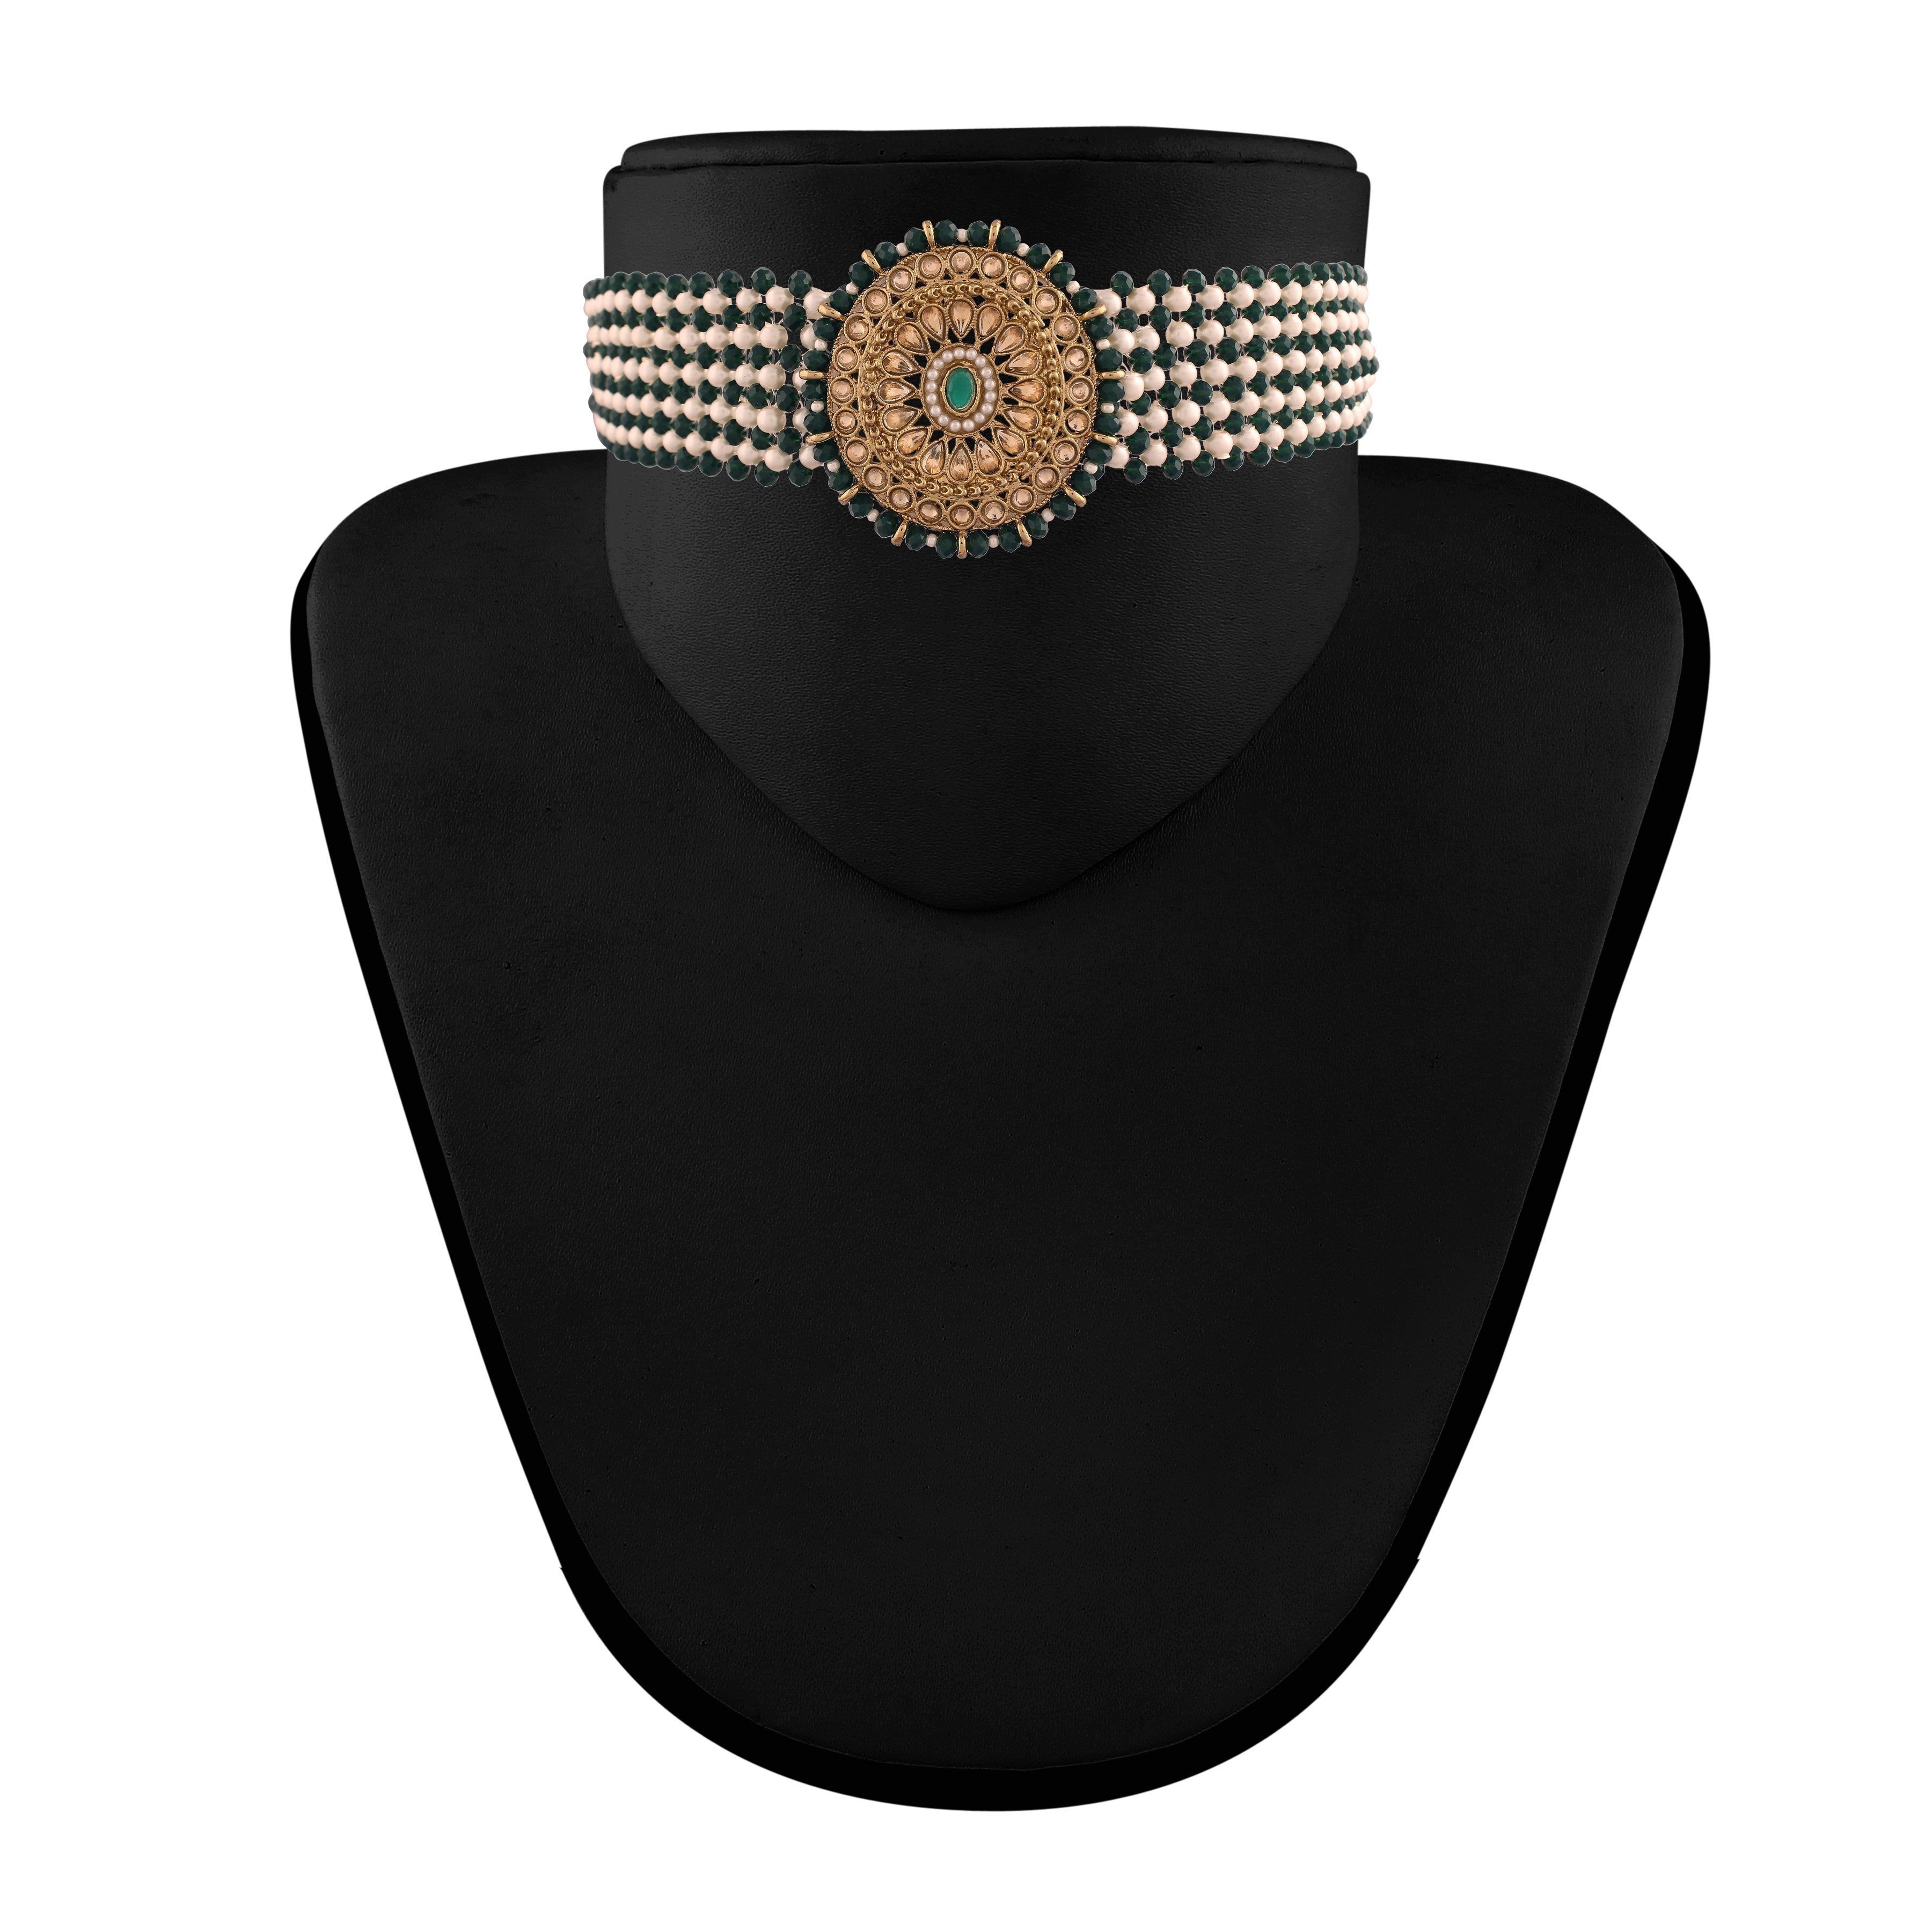 Women's Gold Plated Dark Green Onyx Crystal Beads with Peal Kundan Choker Necklace Set - i jewels